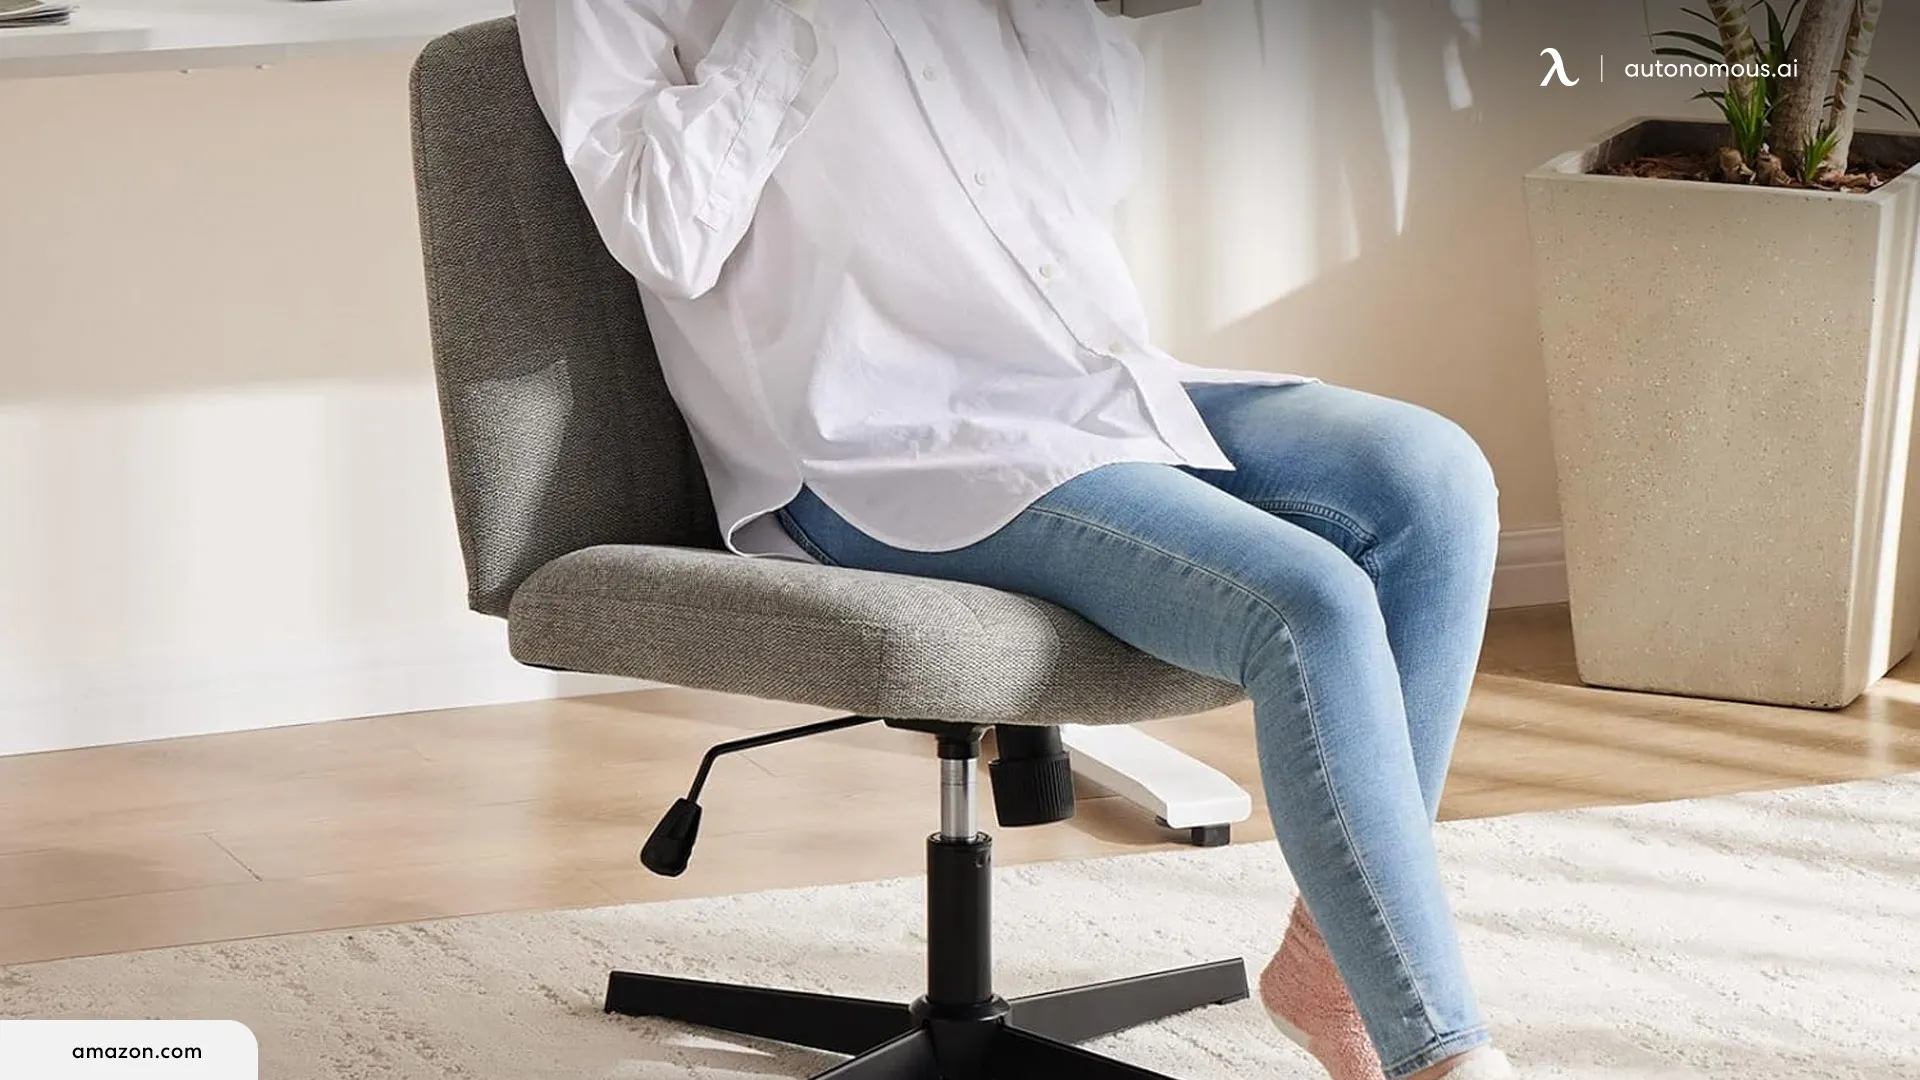 Is sitting on a criss cross bad for you?